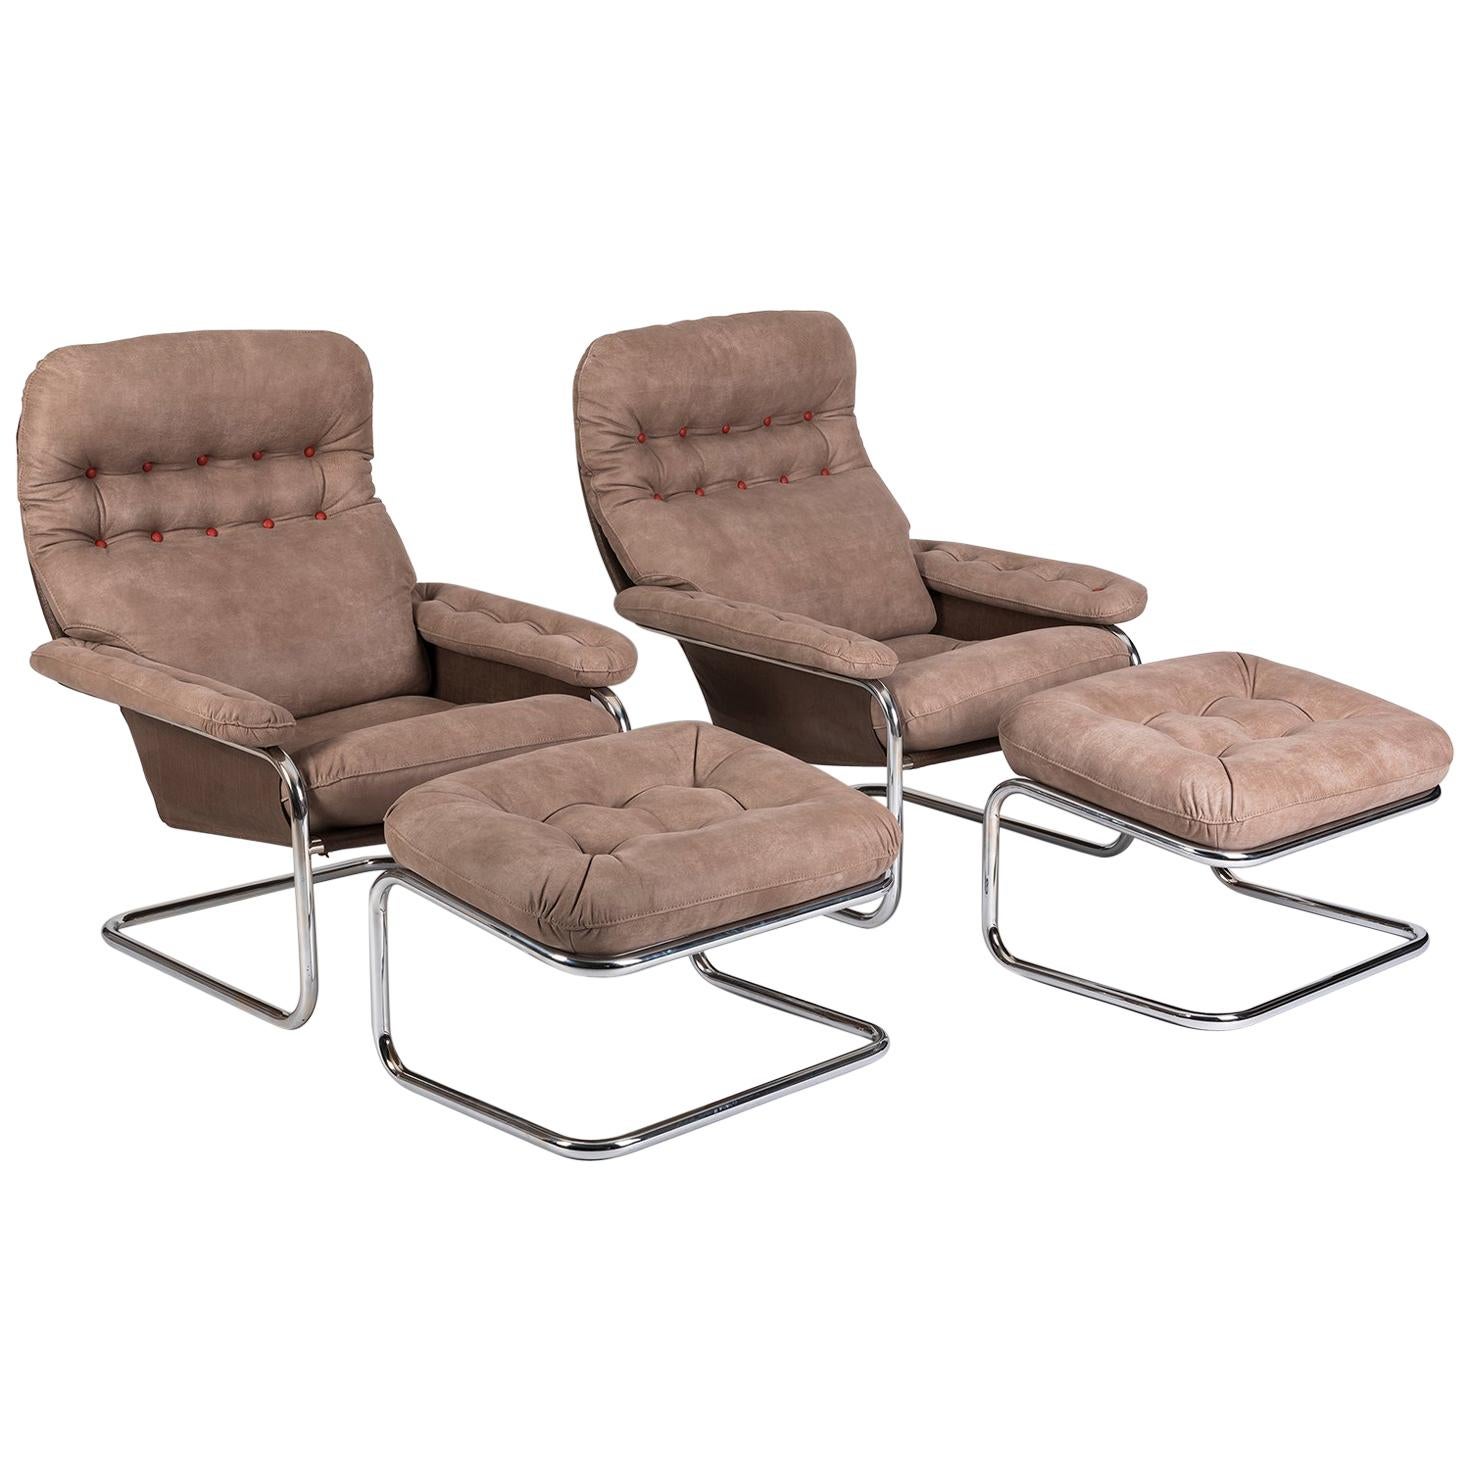 Rare Pair of Dux Lounge chairs and Ottomans attributed to Bruno Mathsson, 1970 For Sale